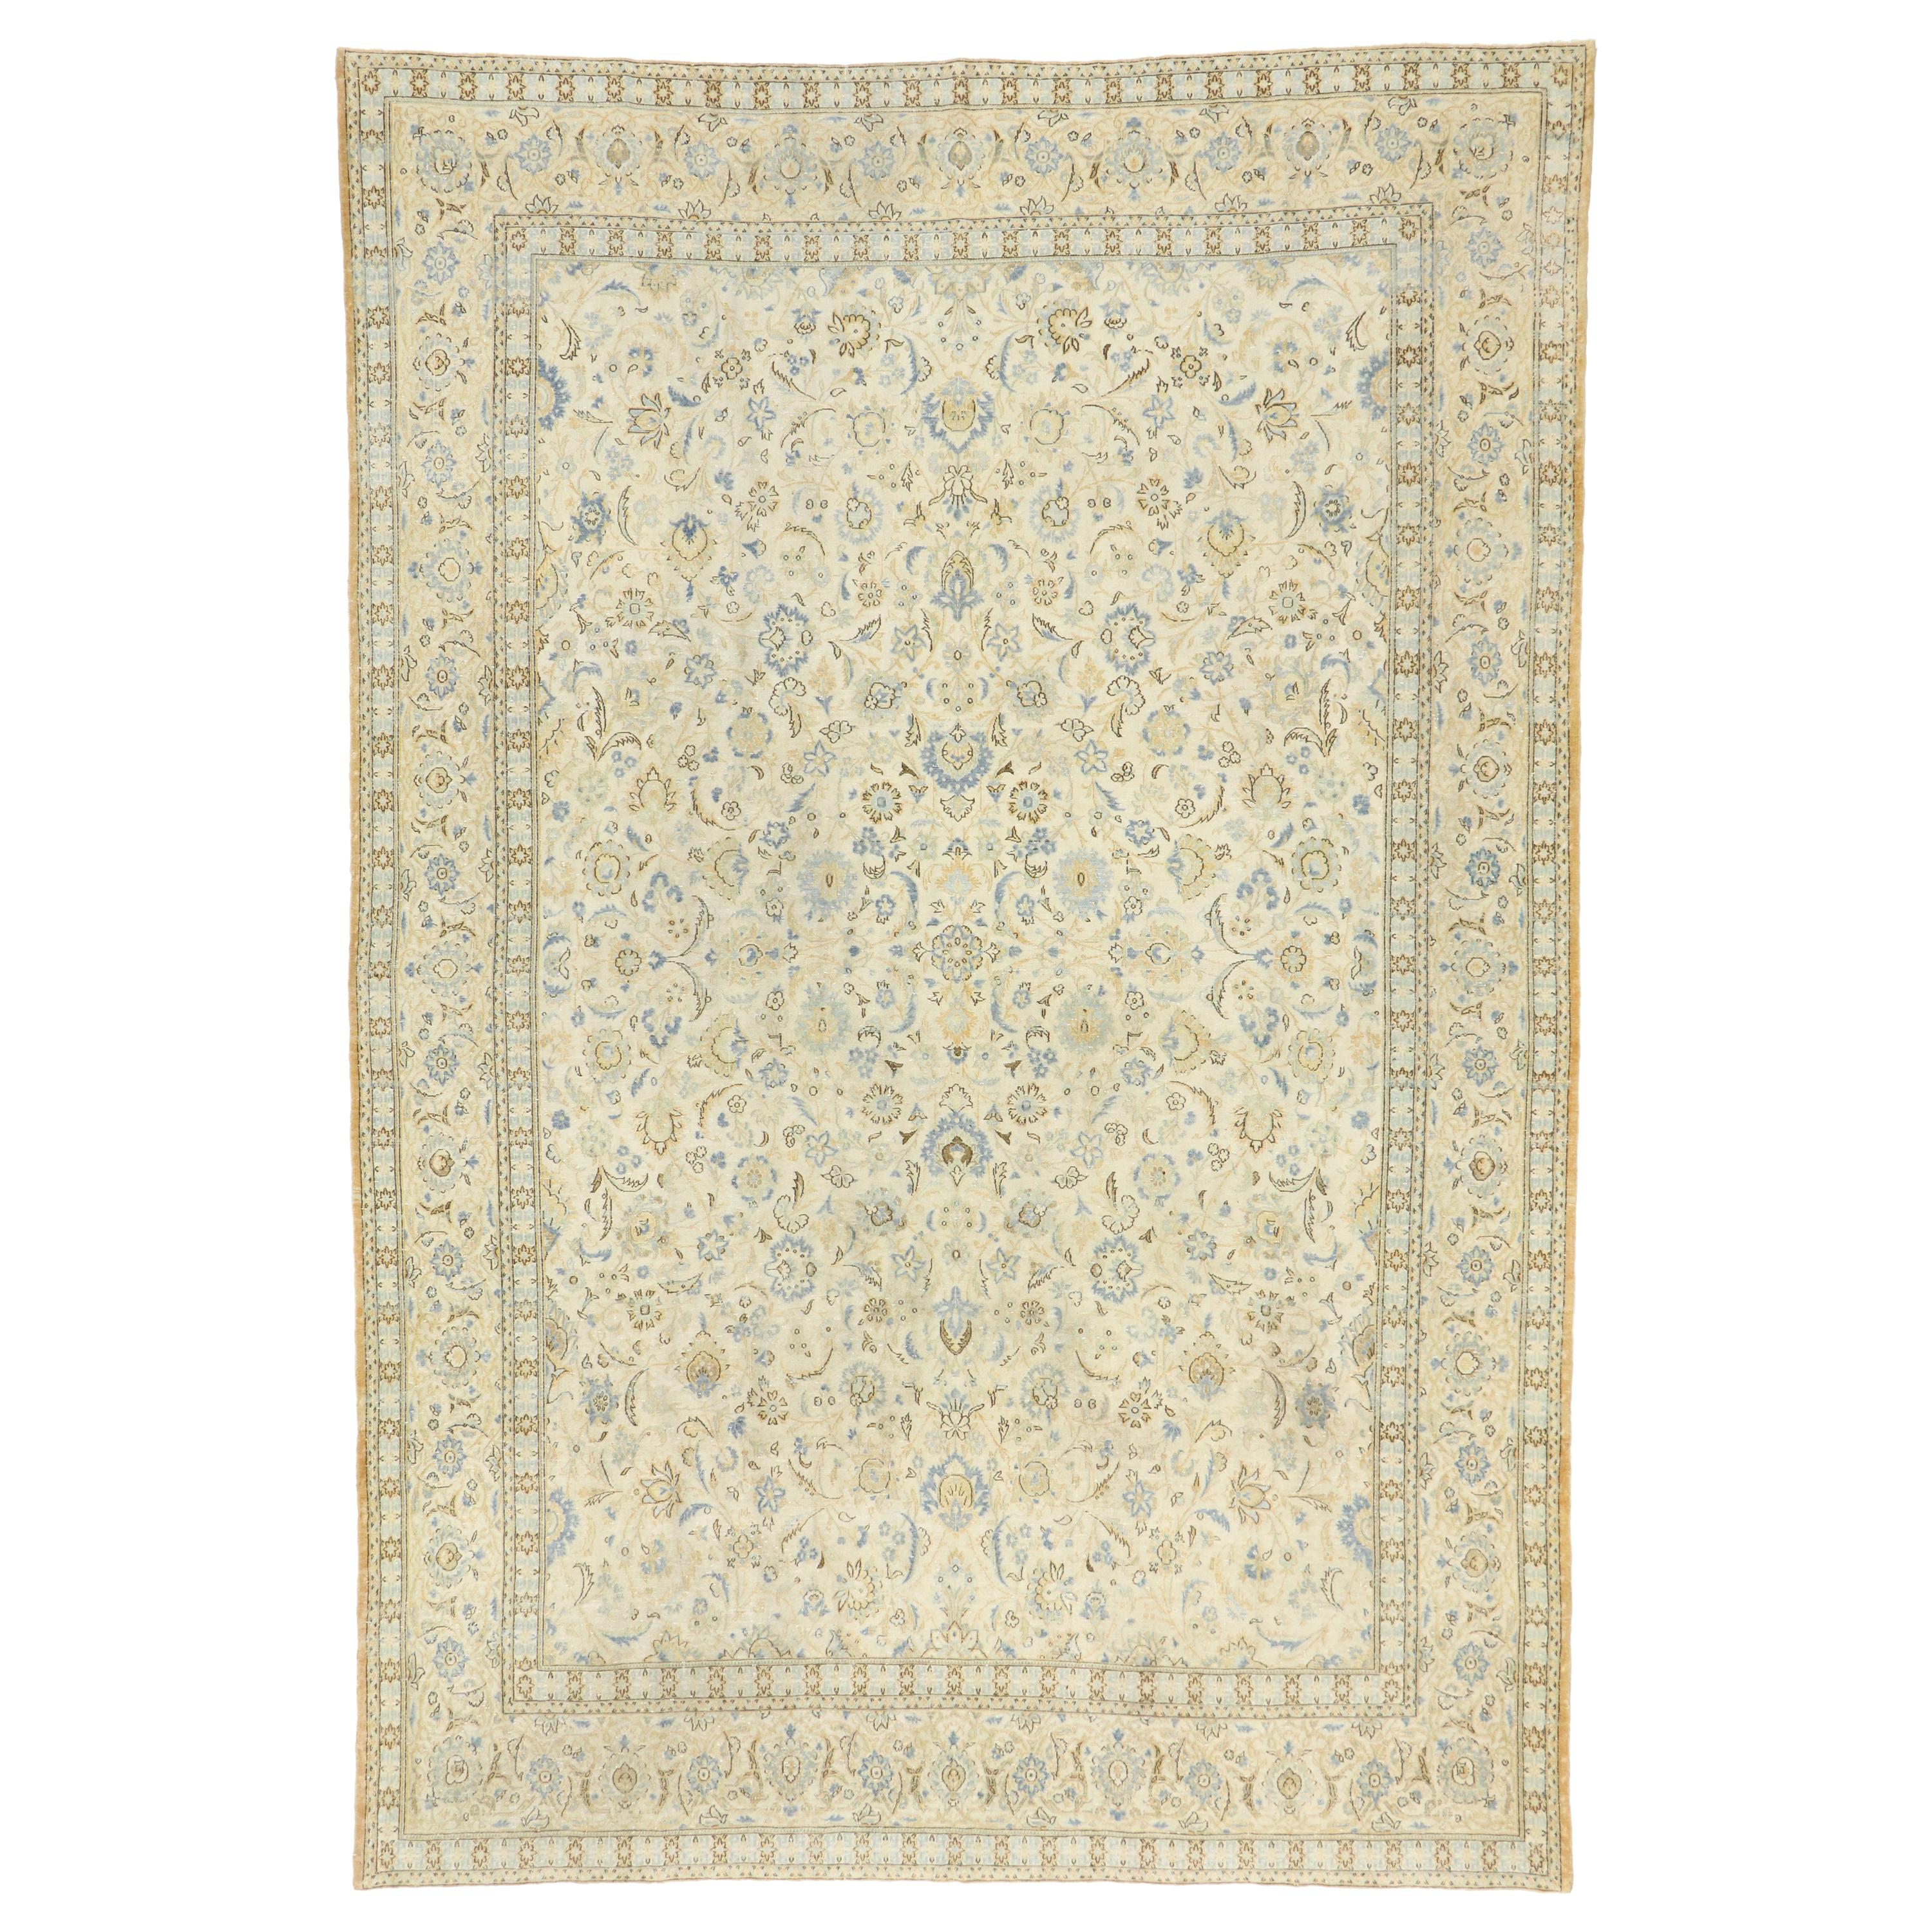 Distressed Antique Persian Kashan Rug with Cotswold English Manor Style For Sale